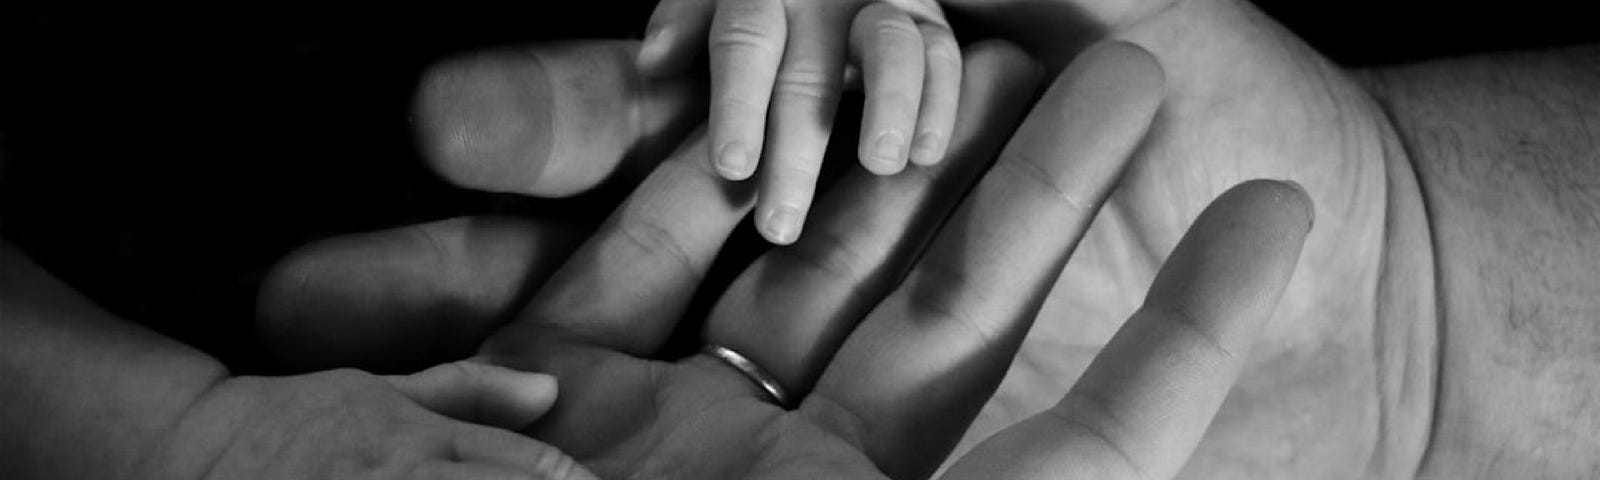 Black & White photo of an adult hand in a younger person’s hand, then two small hands of a baby resting on top. A collage of hands from all stages of life.